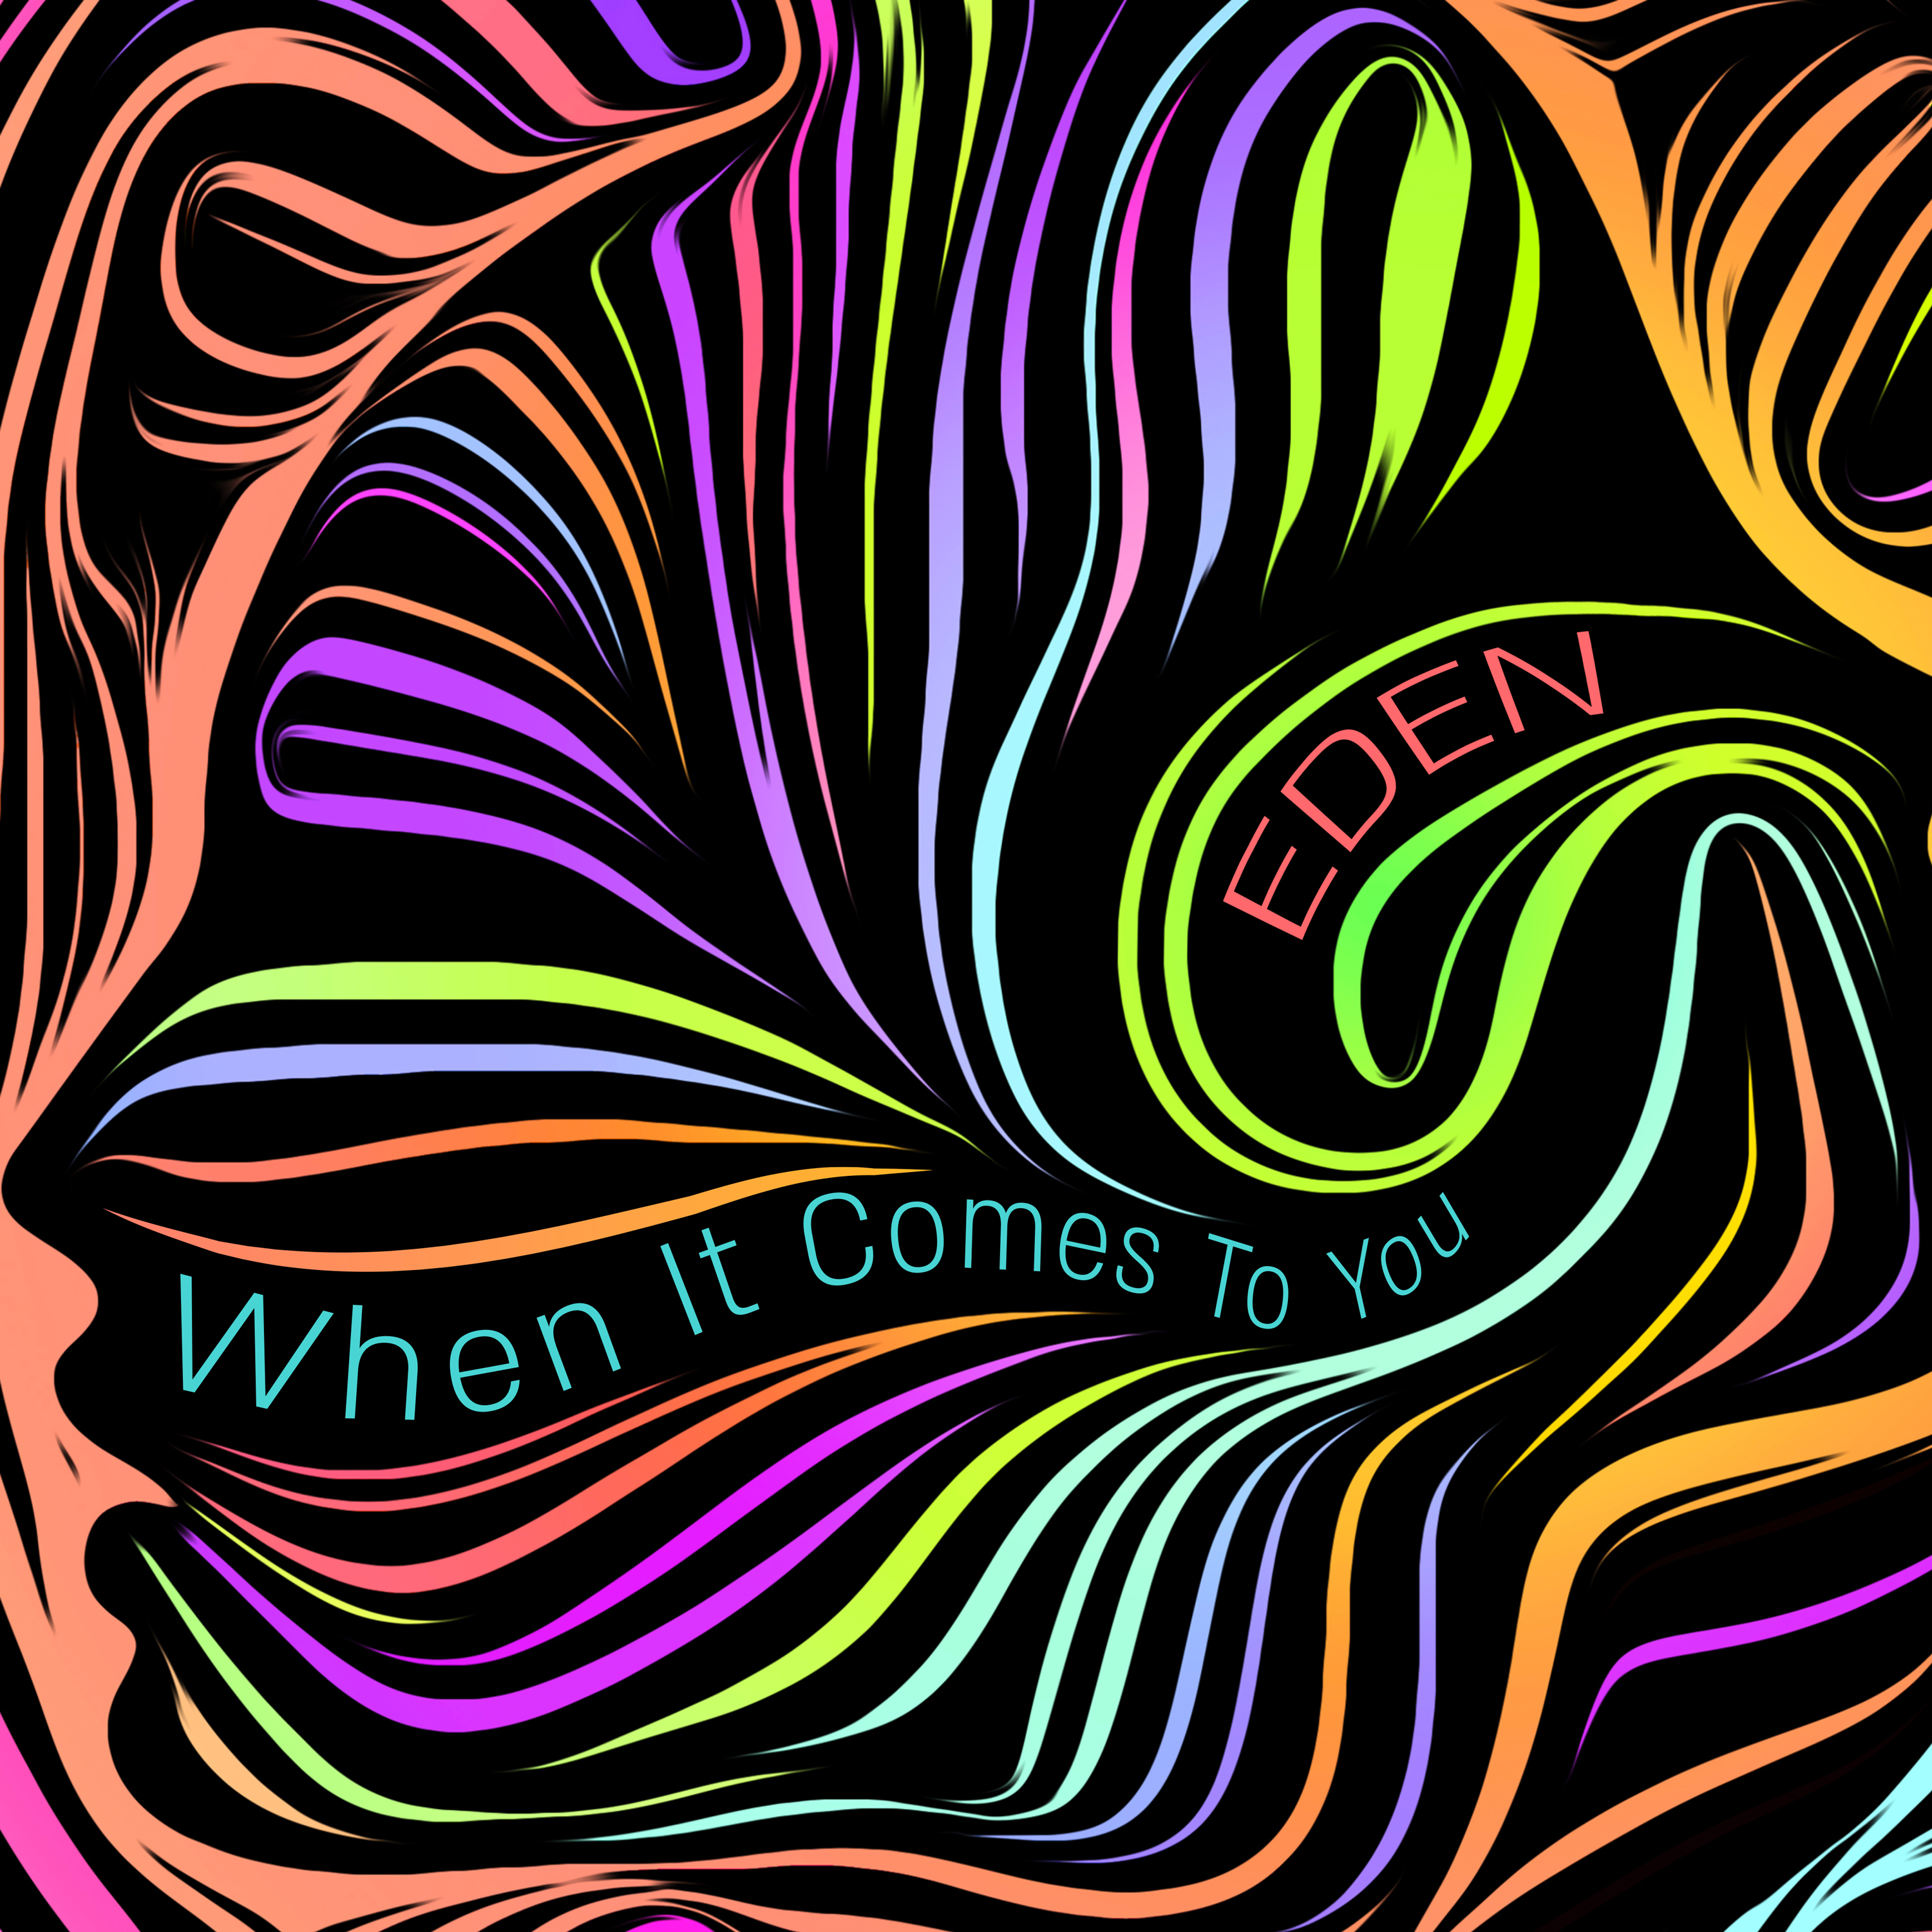 Eden- When It Comes To You